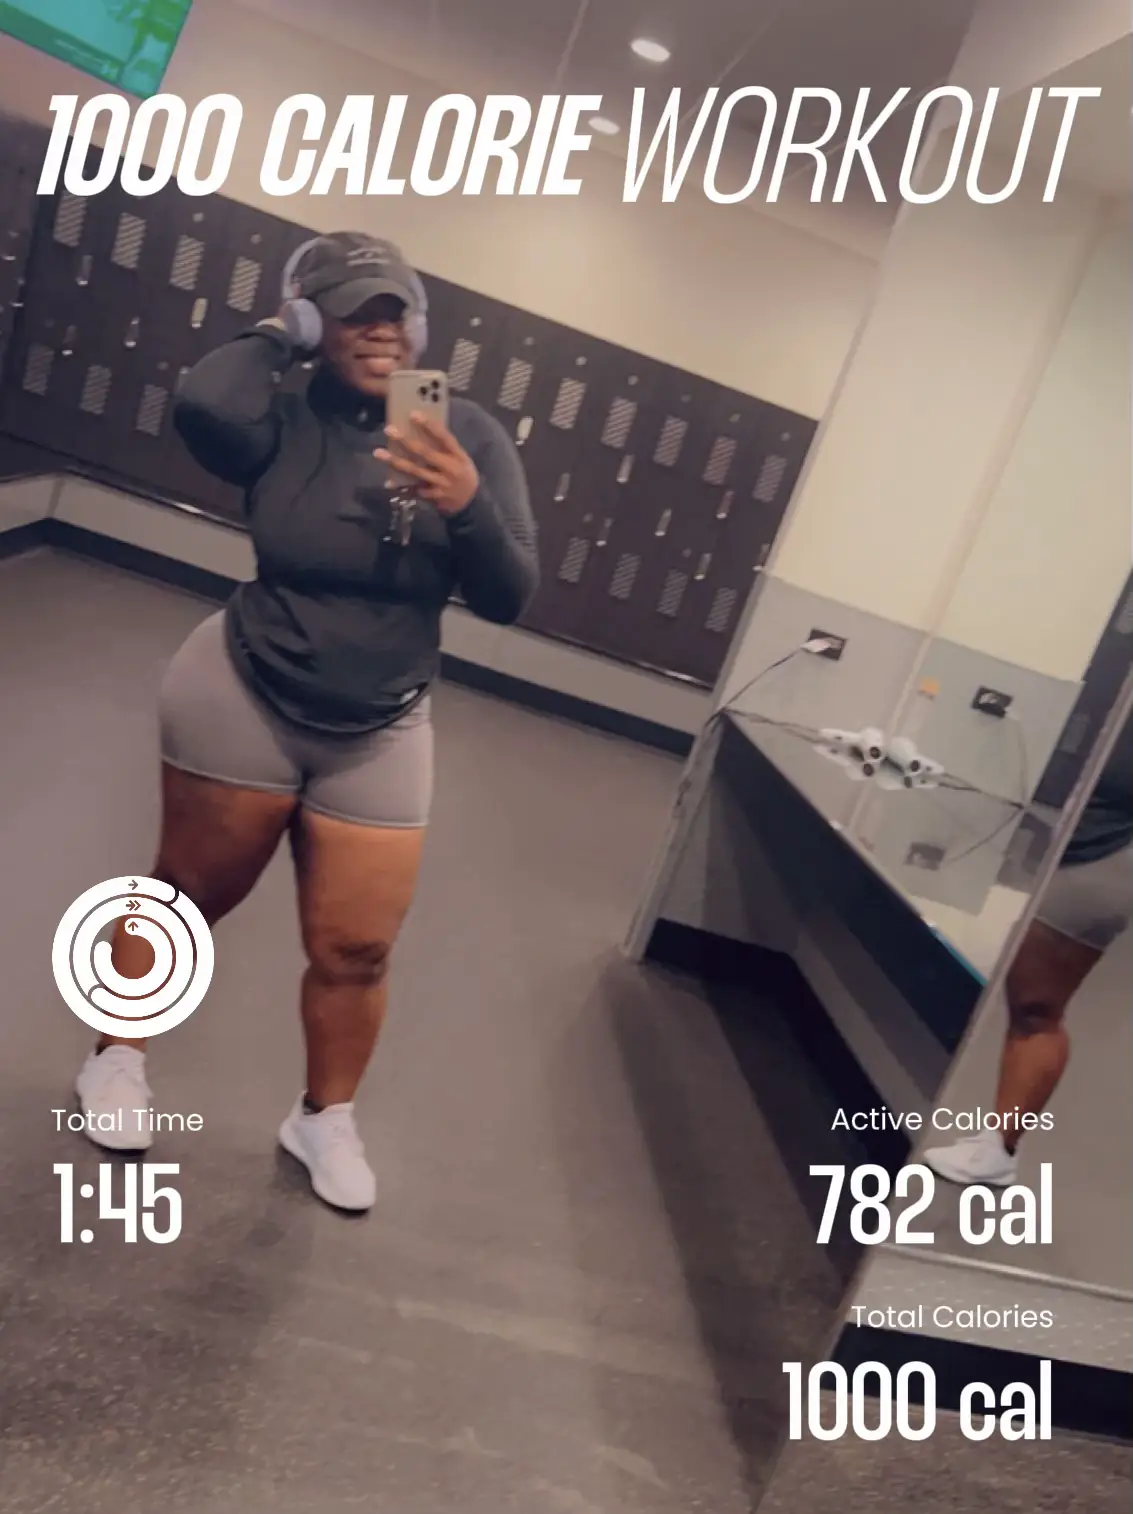 1000 Calorie Workout Gallery Posted